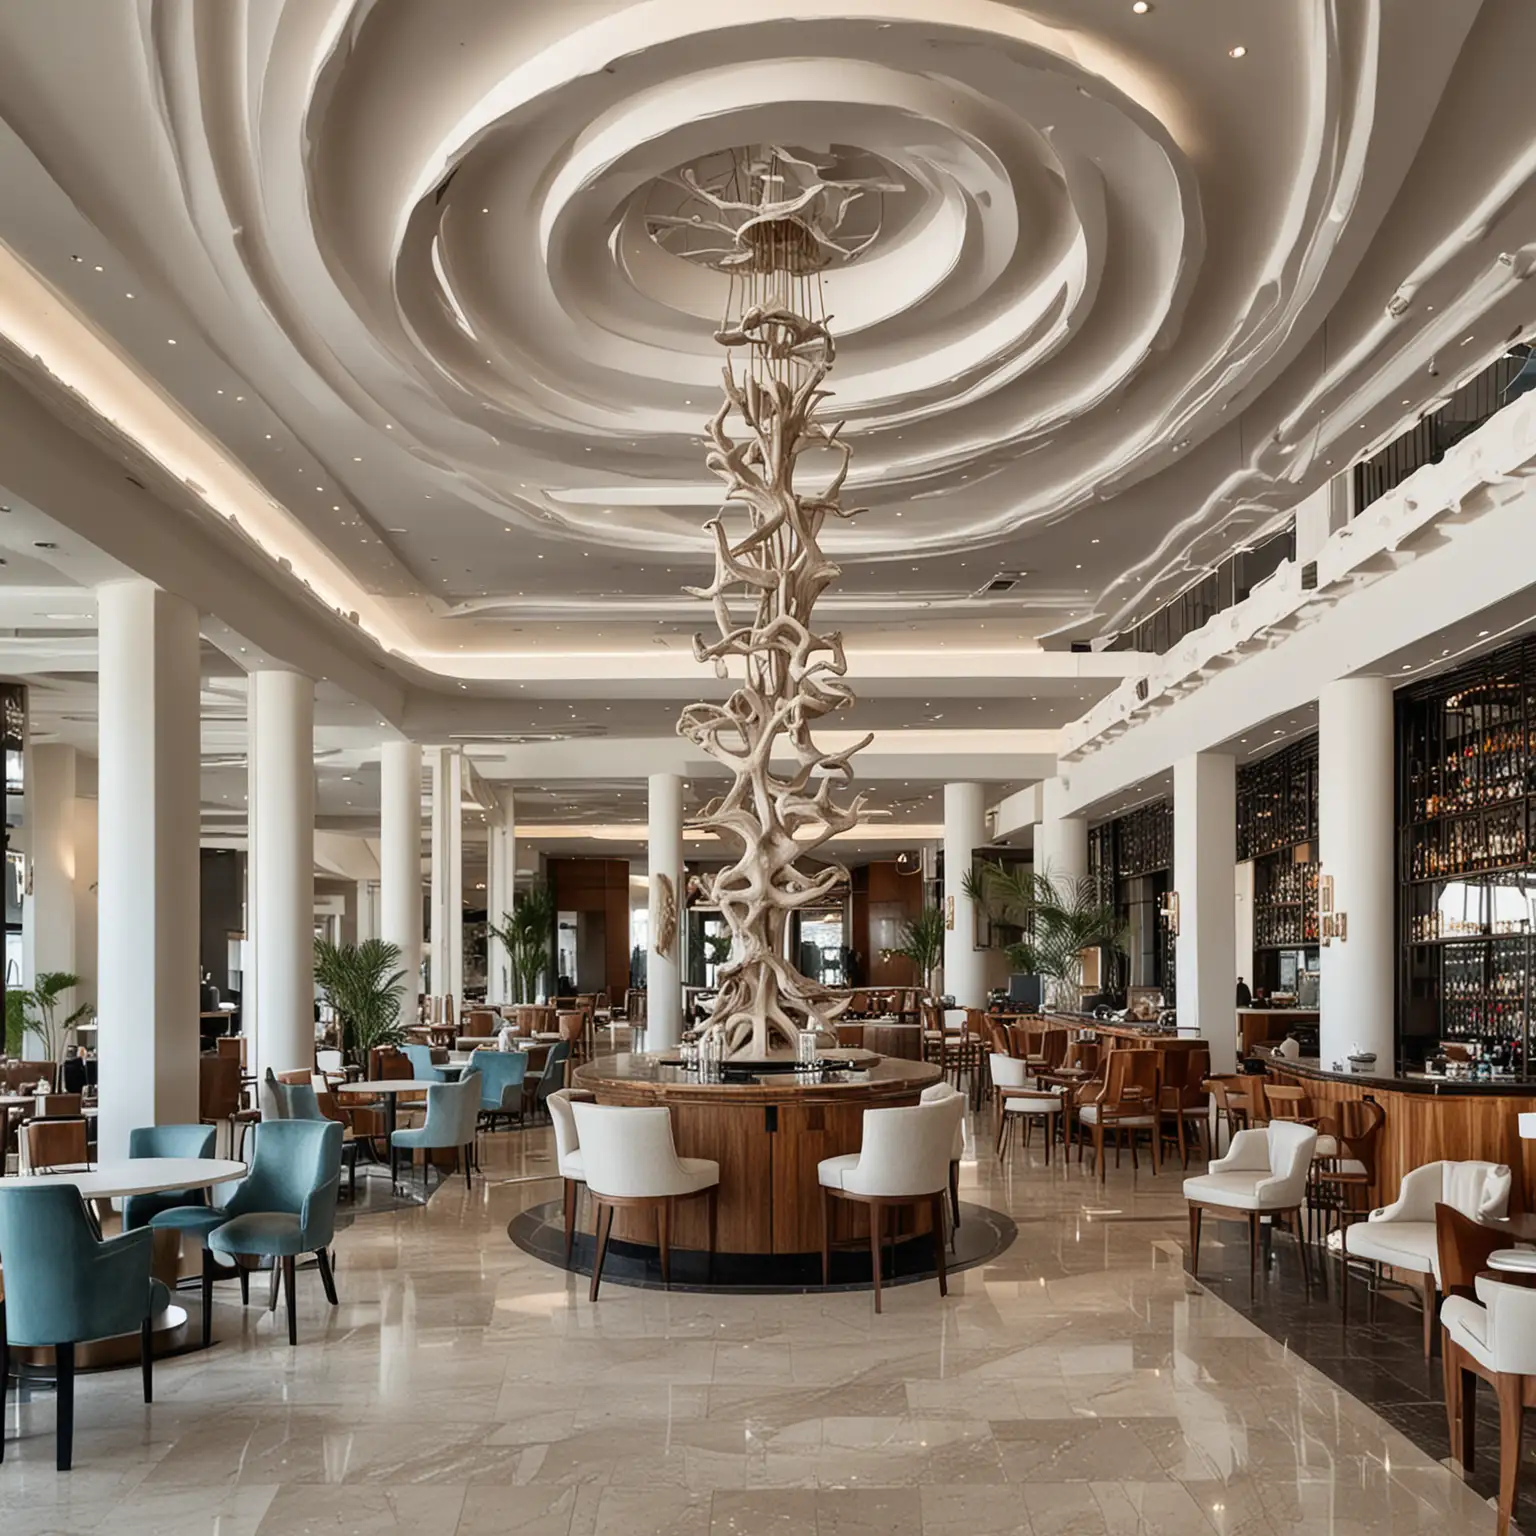 modern coastal grand hotel lobby with ceiling hung sculpture above round restaurant bar in the middle